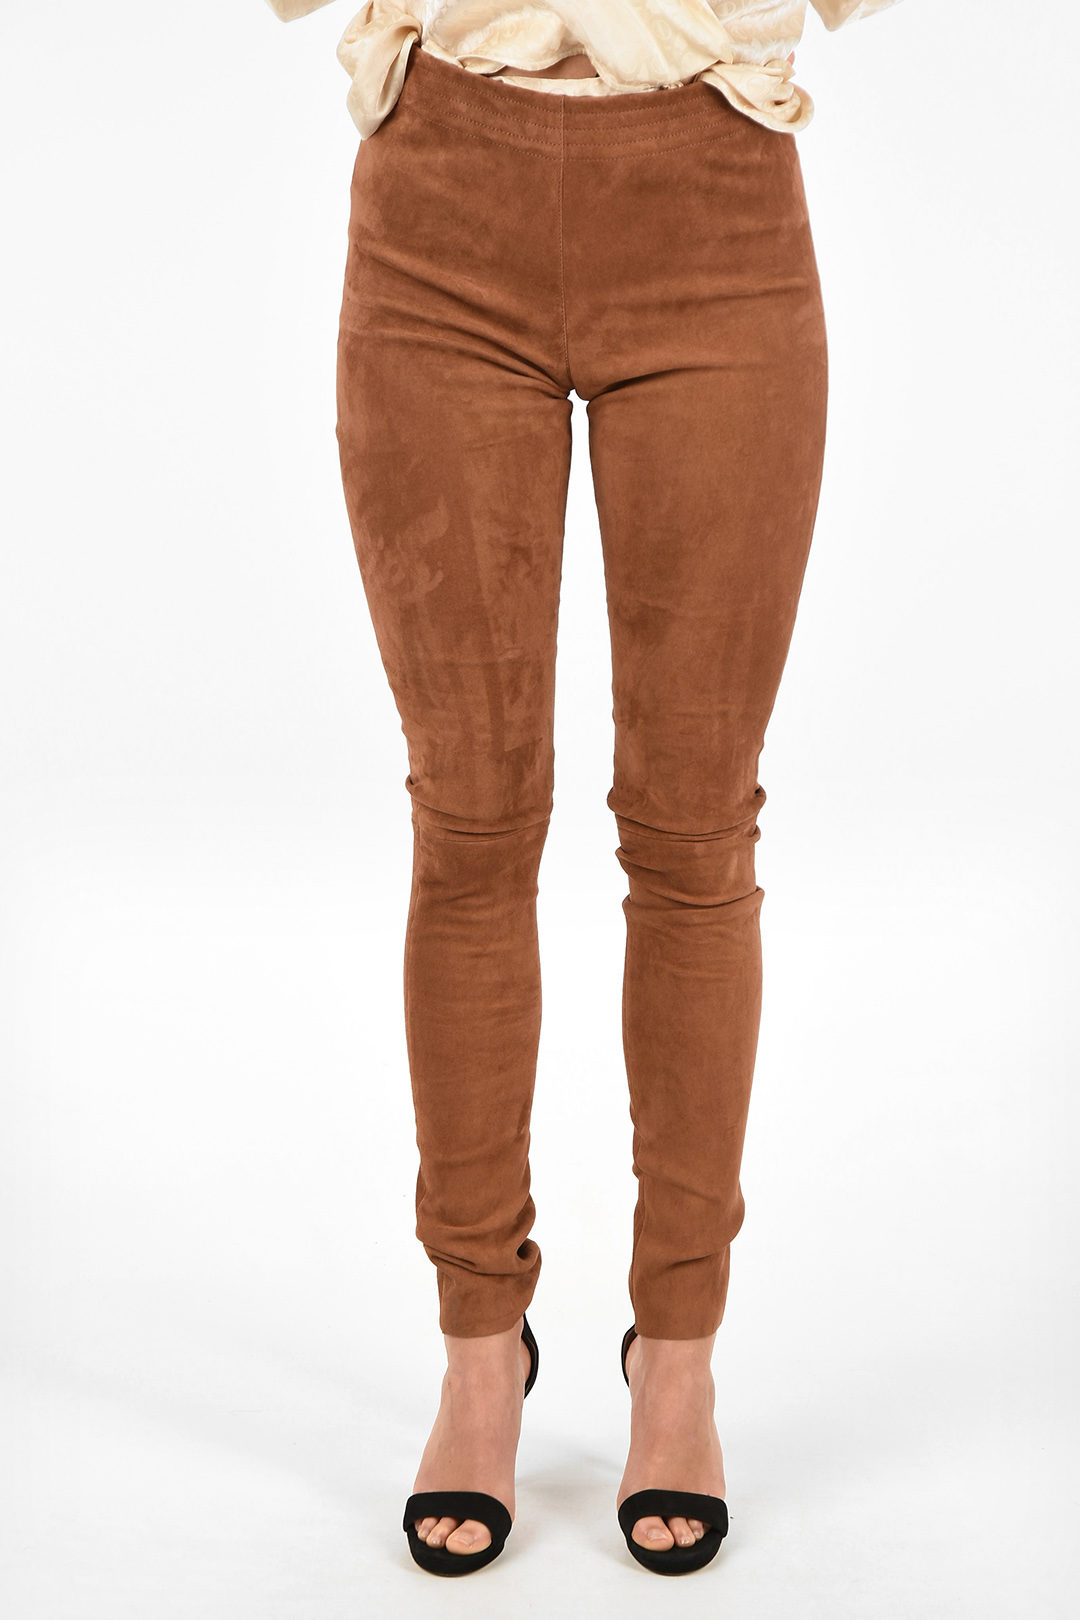  Suede Leather Jeans